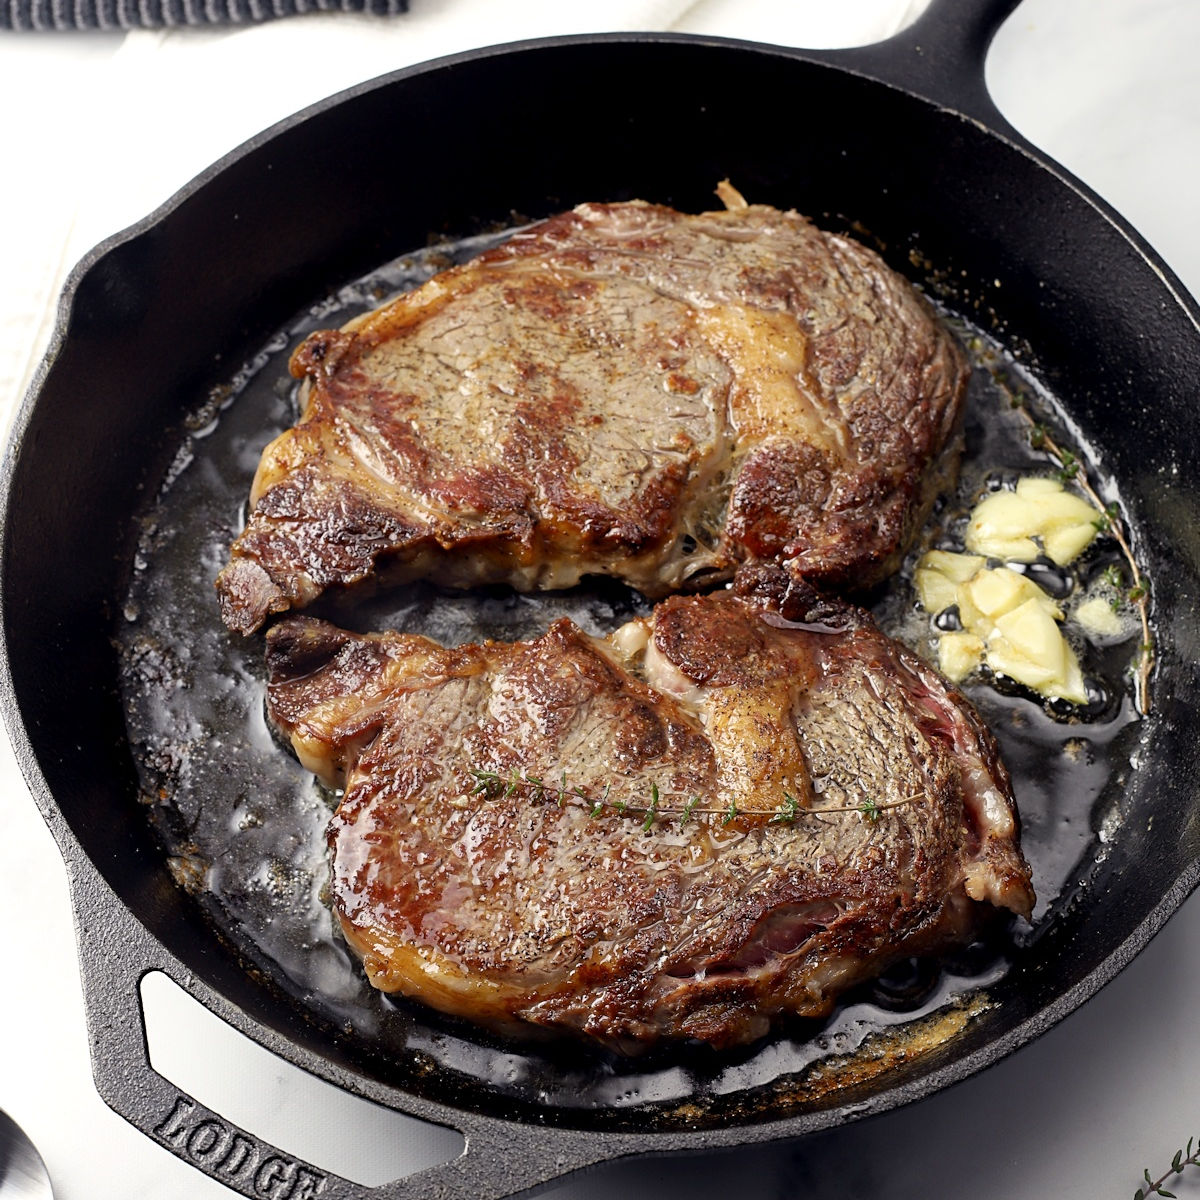 You Should Cook Your Steak In A Cast Iron Pan. Here's Why